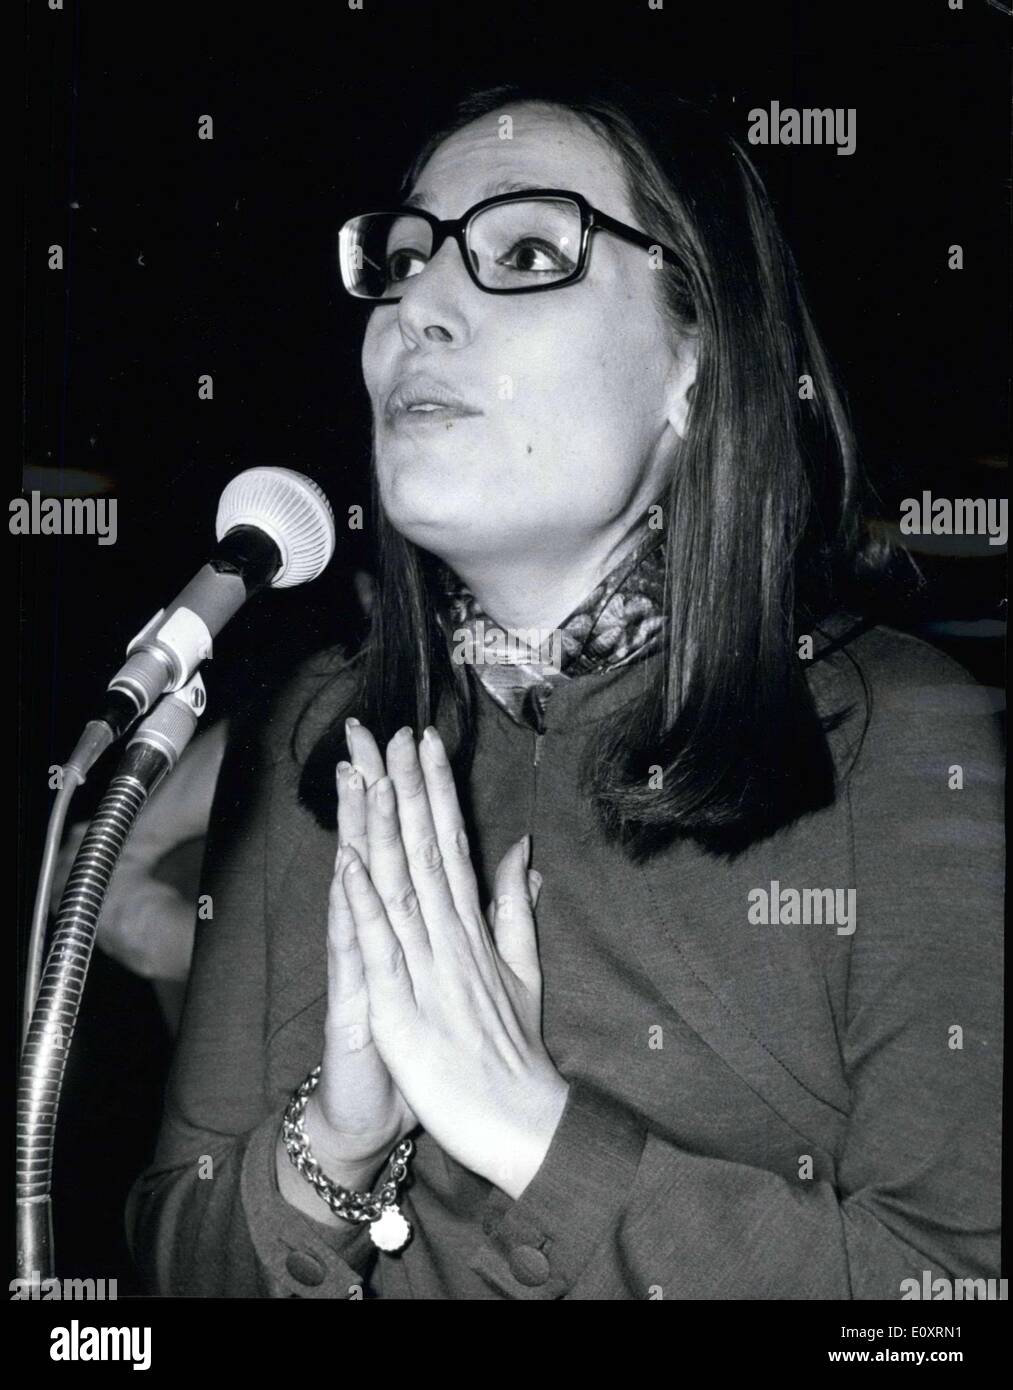 Oct. 24, 1967 - Singer Nana Mouskouri will appear on stage in a red velvet dress on the stage of the Olympia on October 26th. After her recital, nana Mouskouri will have many good reasons to take a break. Her first child is due in February. Picture: Nana Mouskouri during a rehearsal. Stock Photo